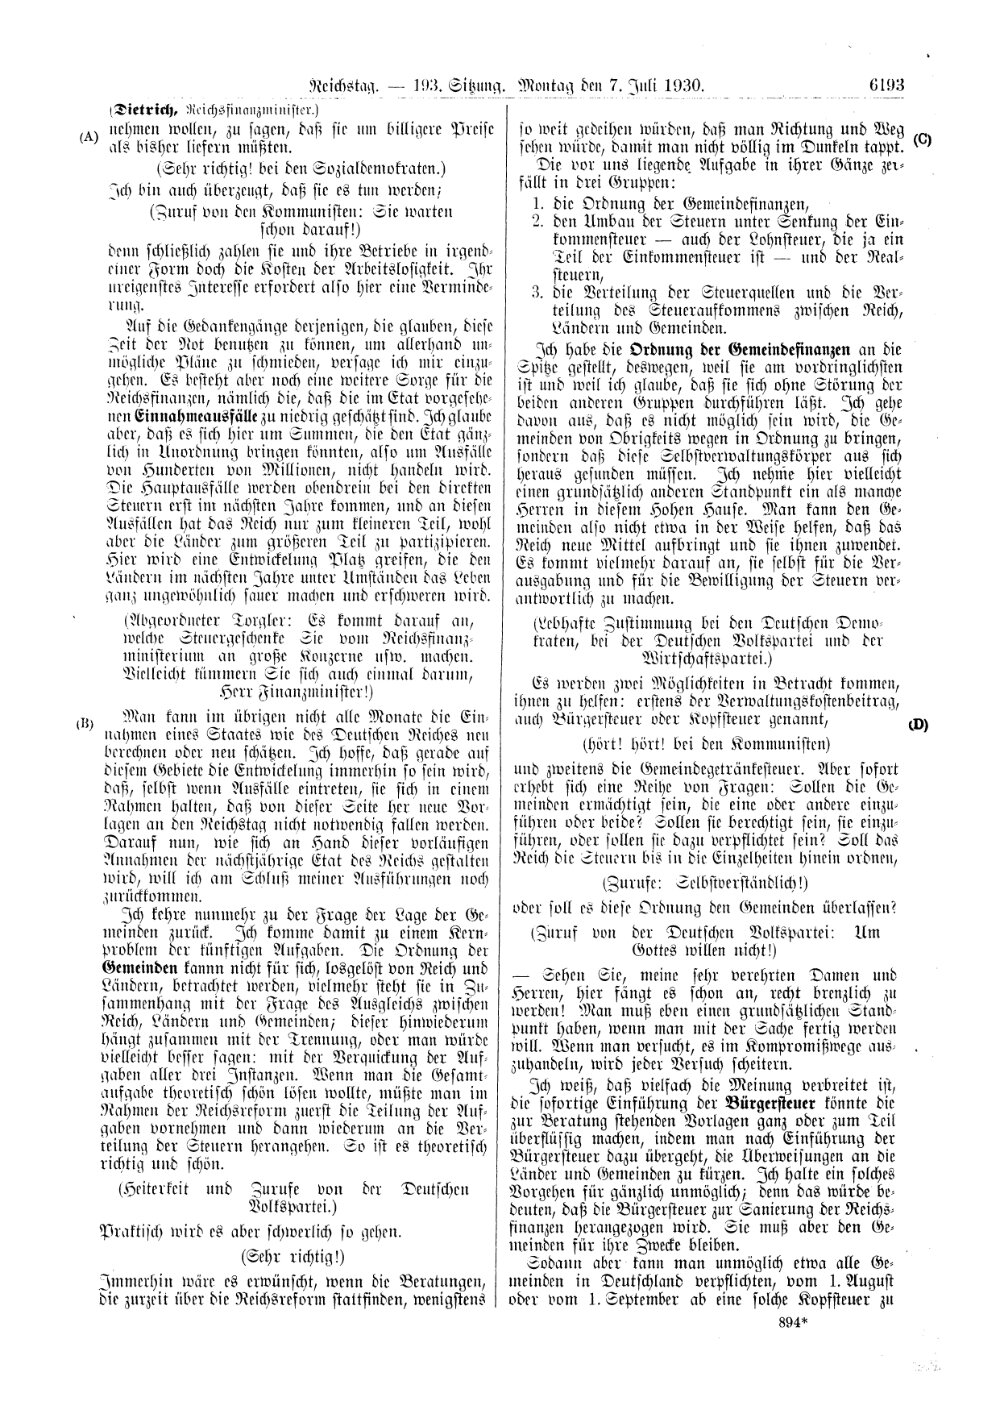 Scan of page 6193